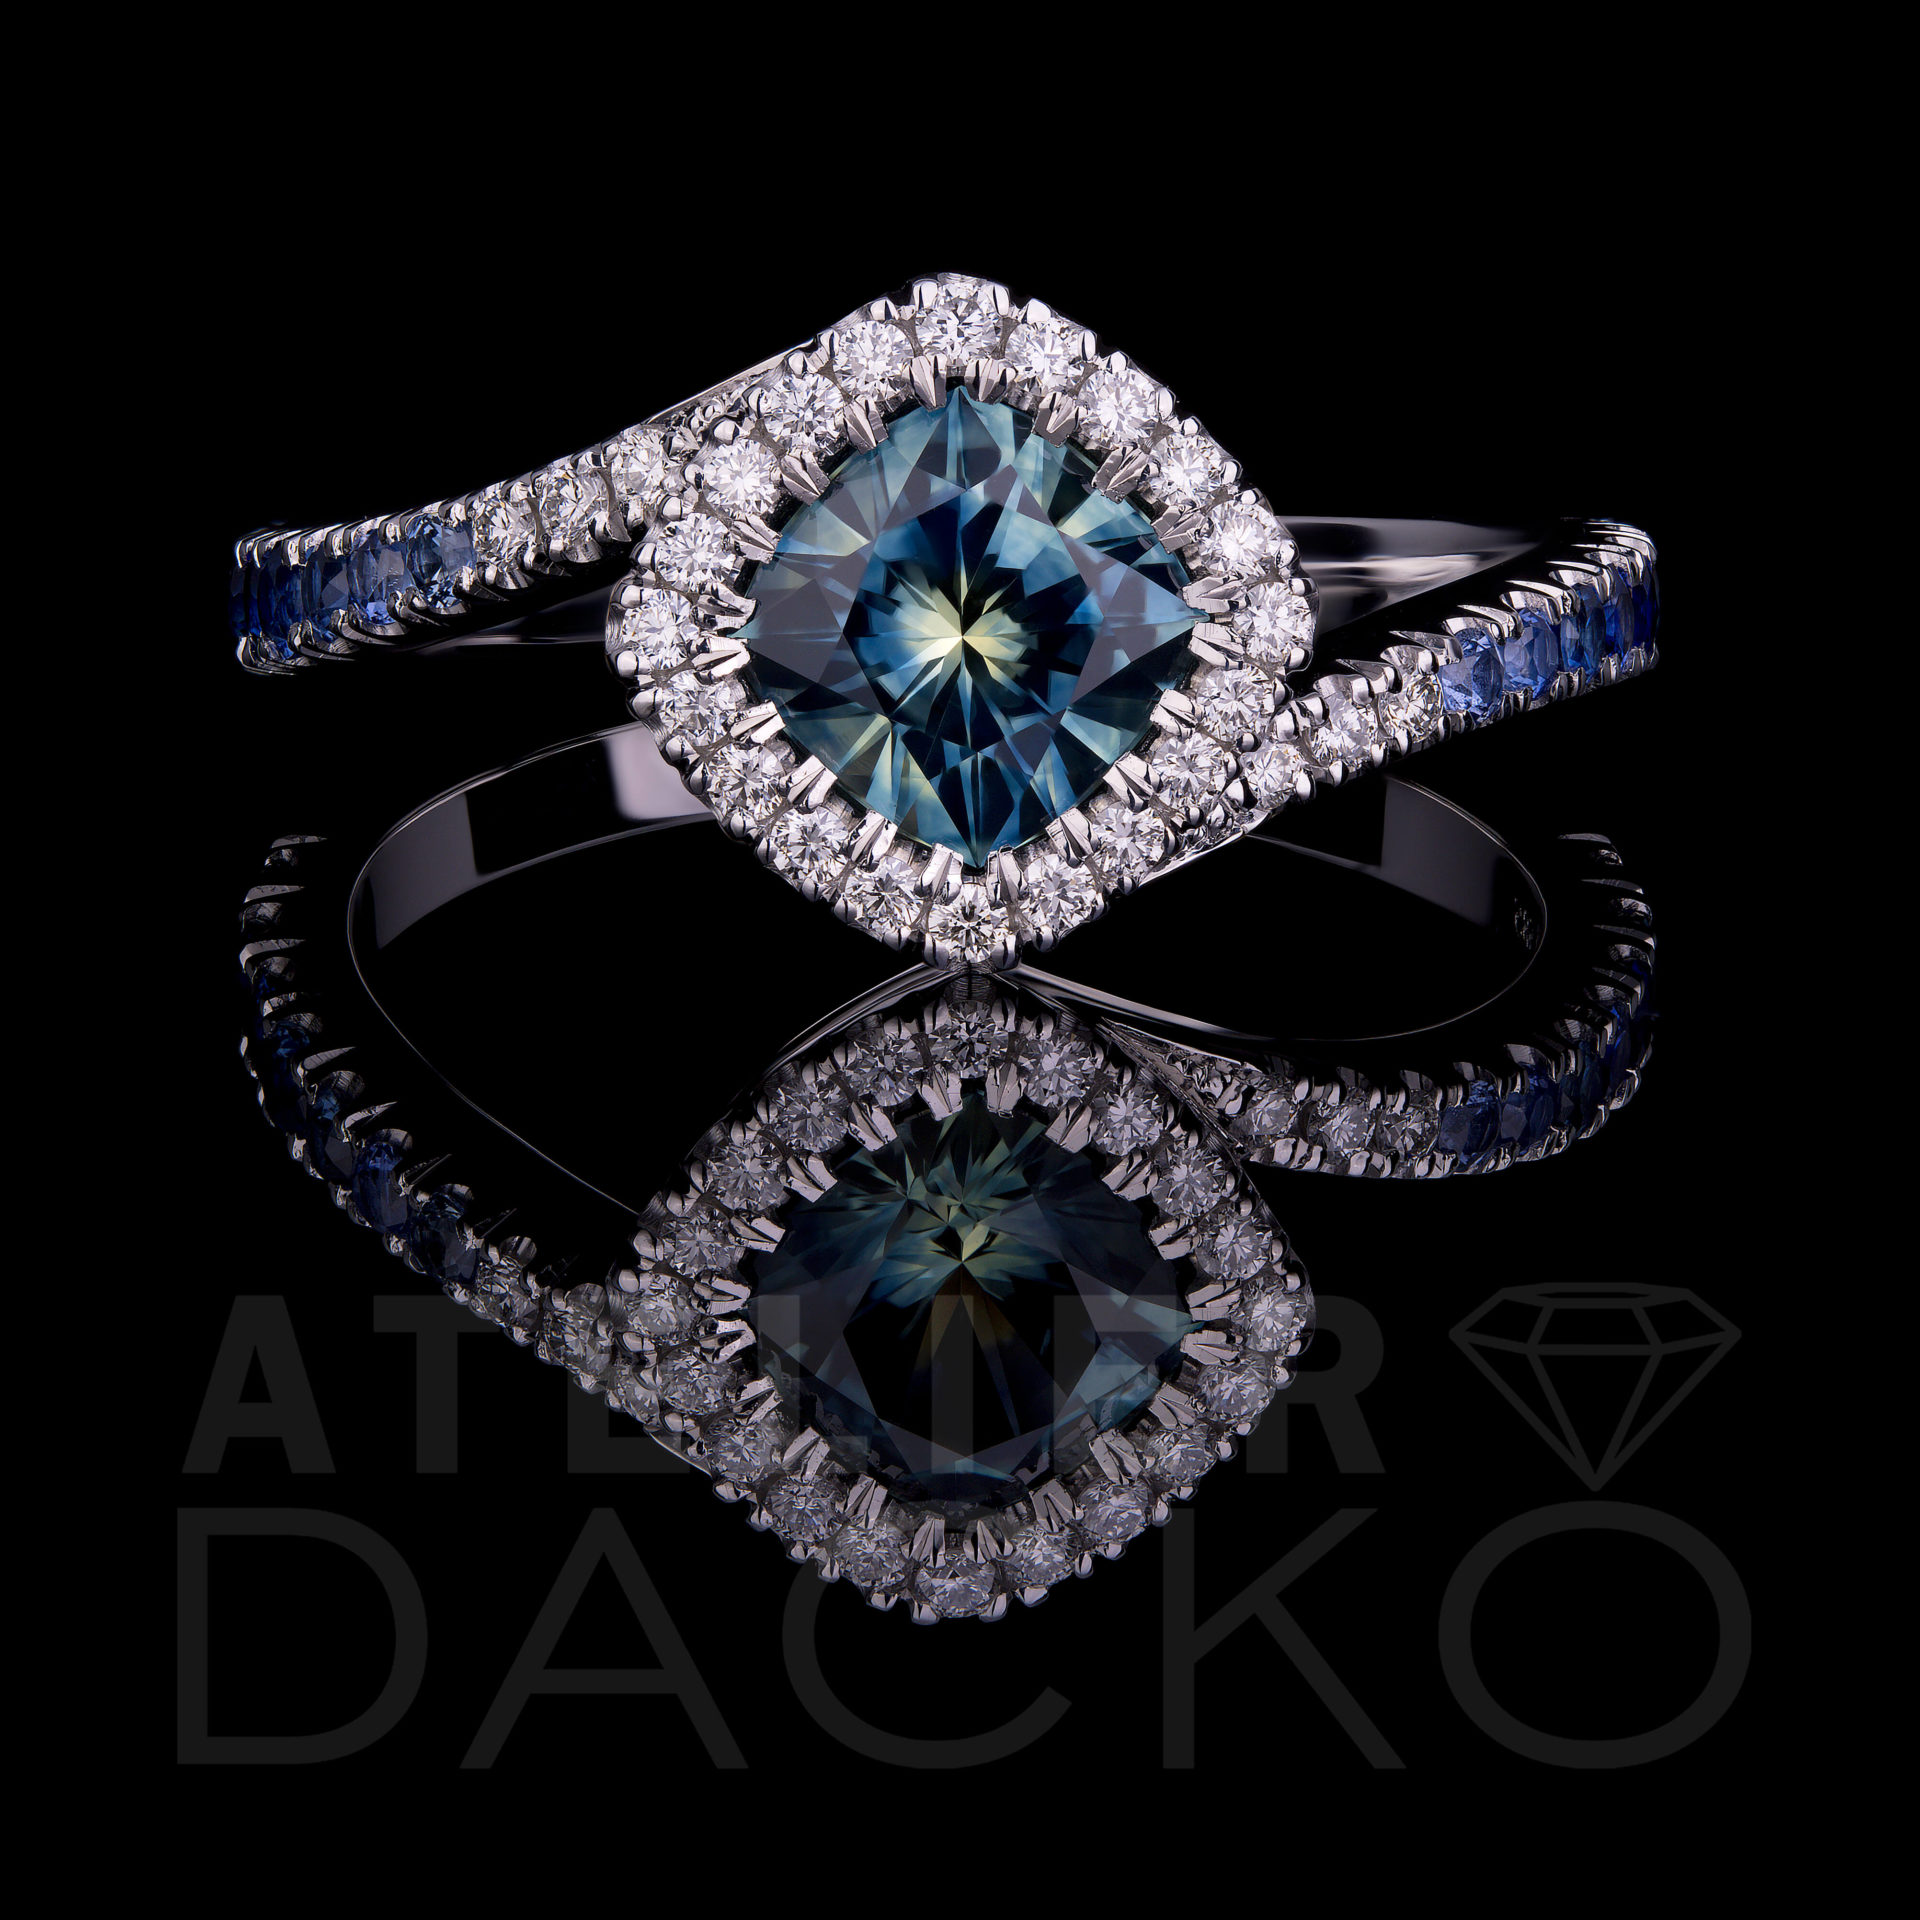 AD012 - 0.95 CT Blue Sapphire Clawless Halo Ring with a Gradient Band - 1